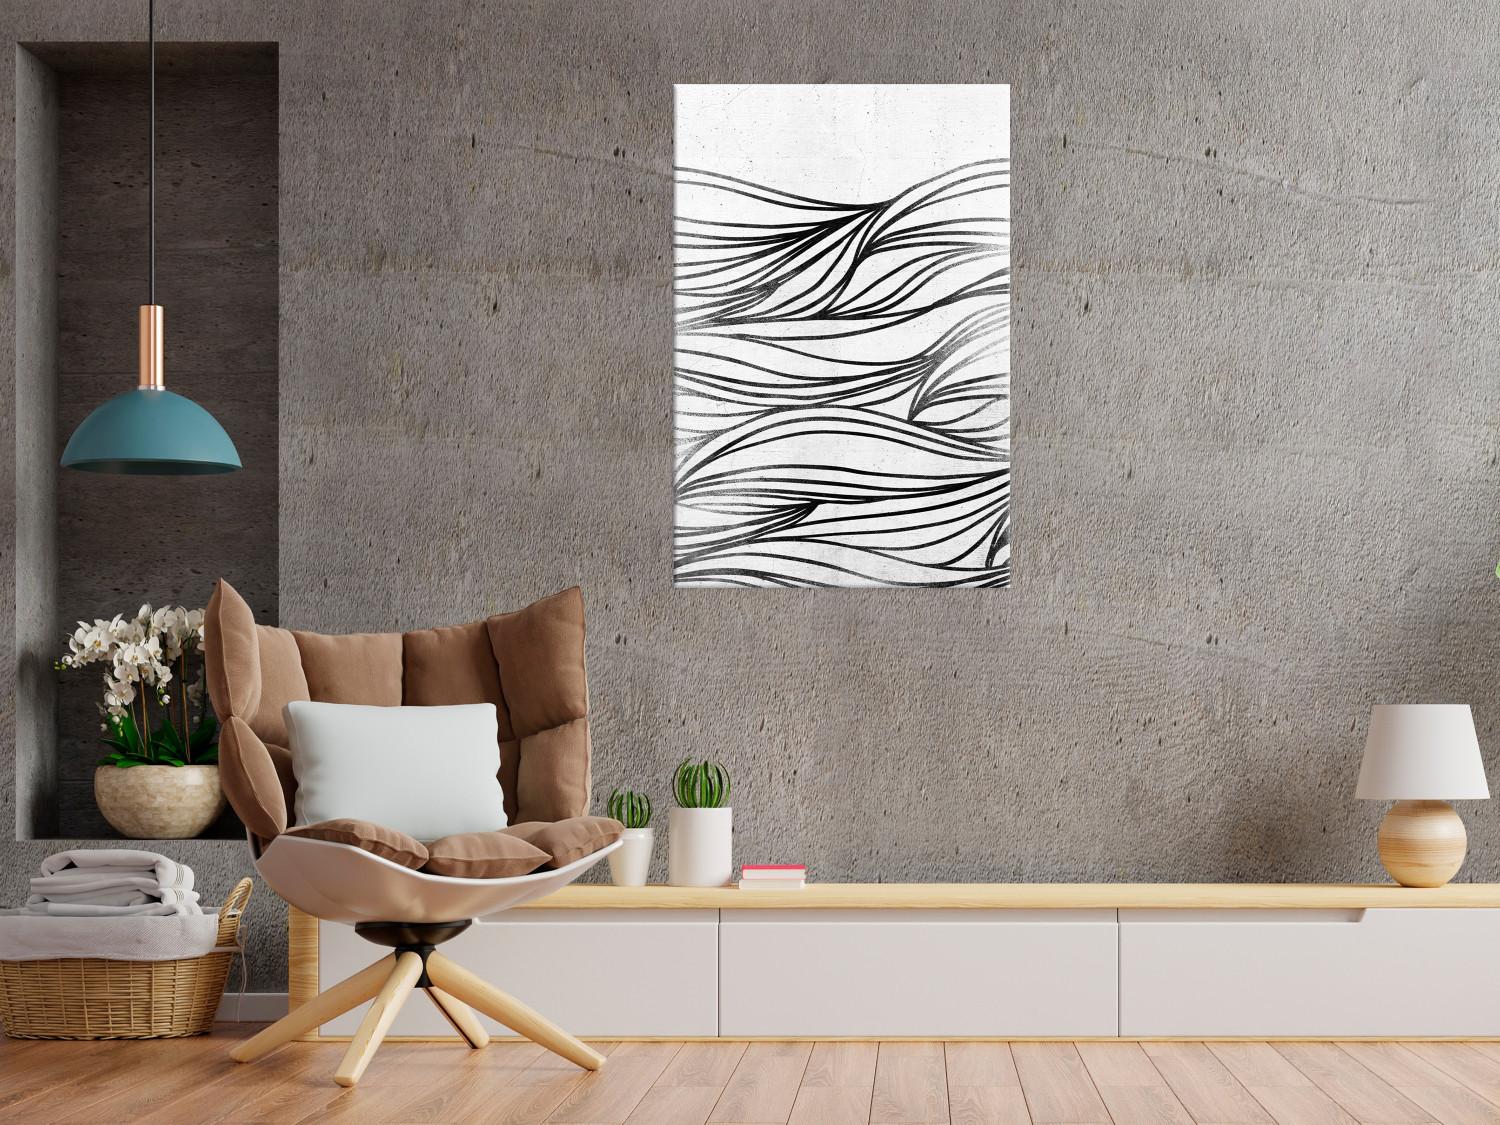 Canvas Drawings on Water (1-piece) Vertical - black and white abstraction